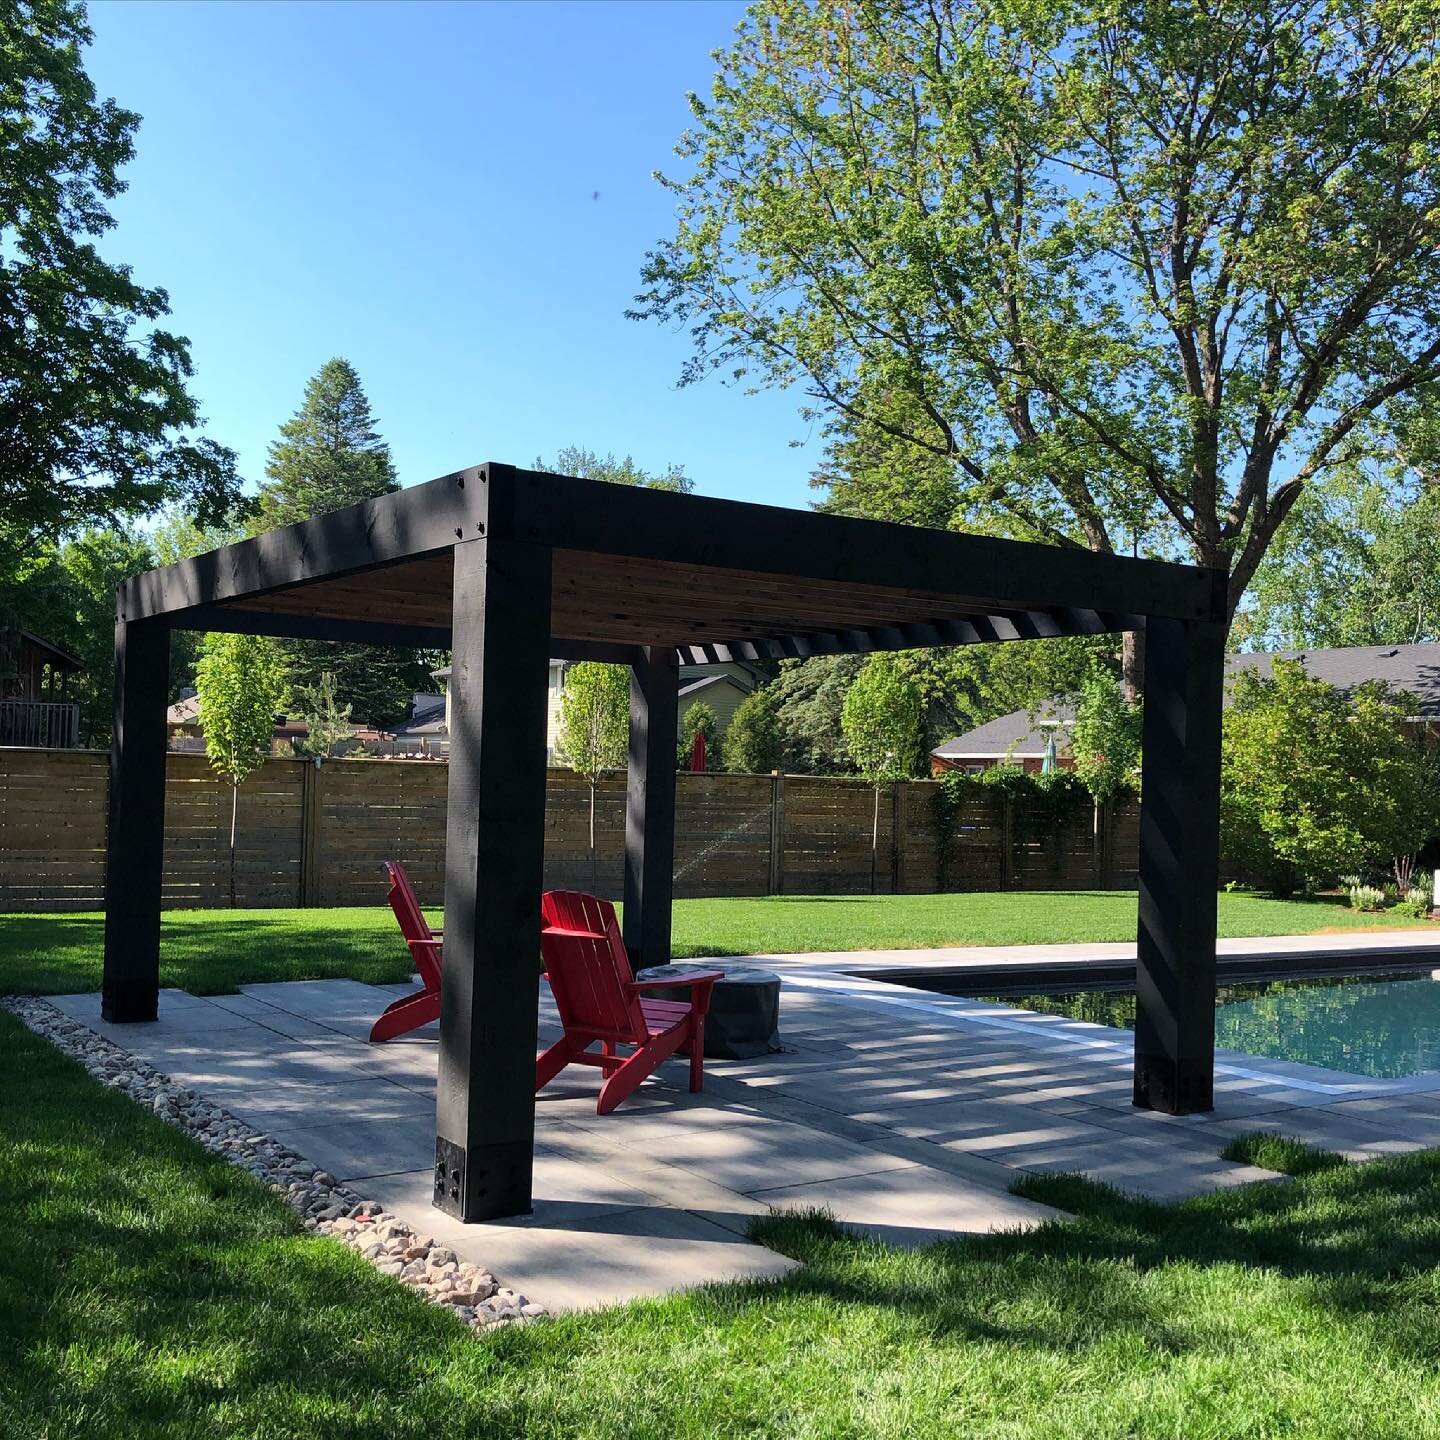 Nice shady spot to sit and enjoy an afternoon by the pool.  #lifeoutdoors #pergola #patioseason #backyard #waterfront #inspiringartscapes